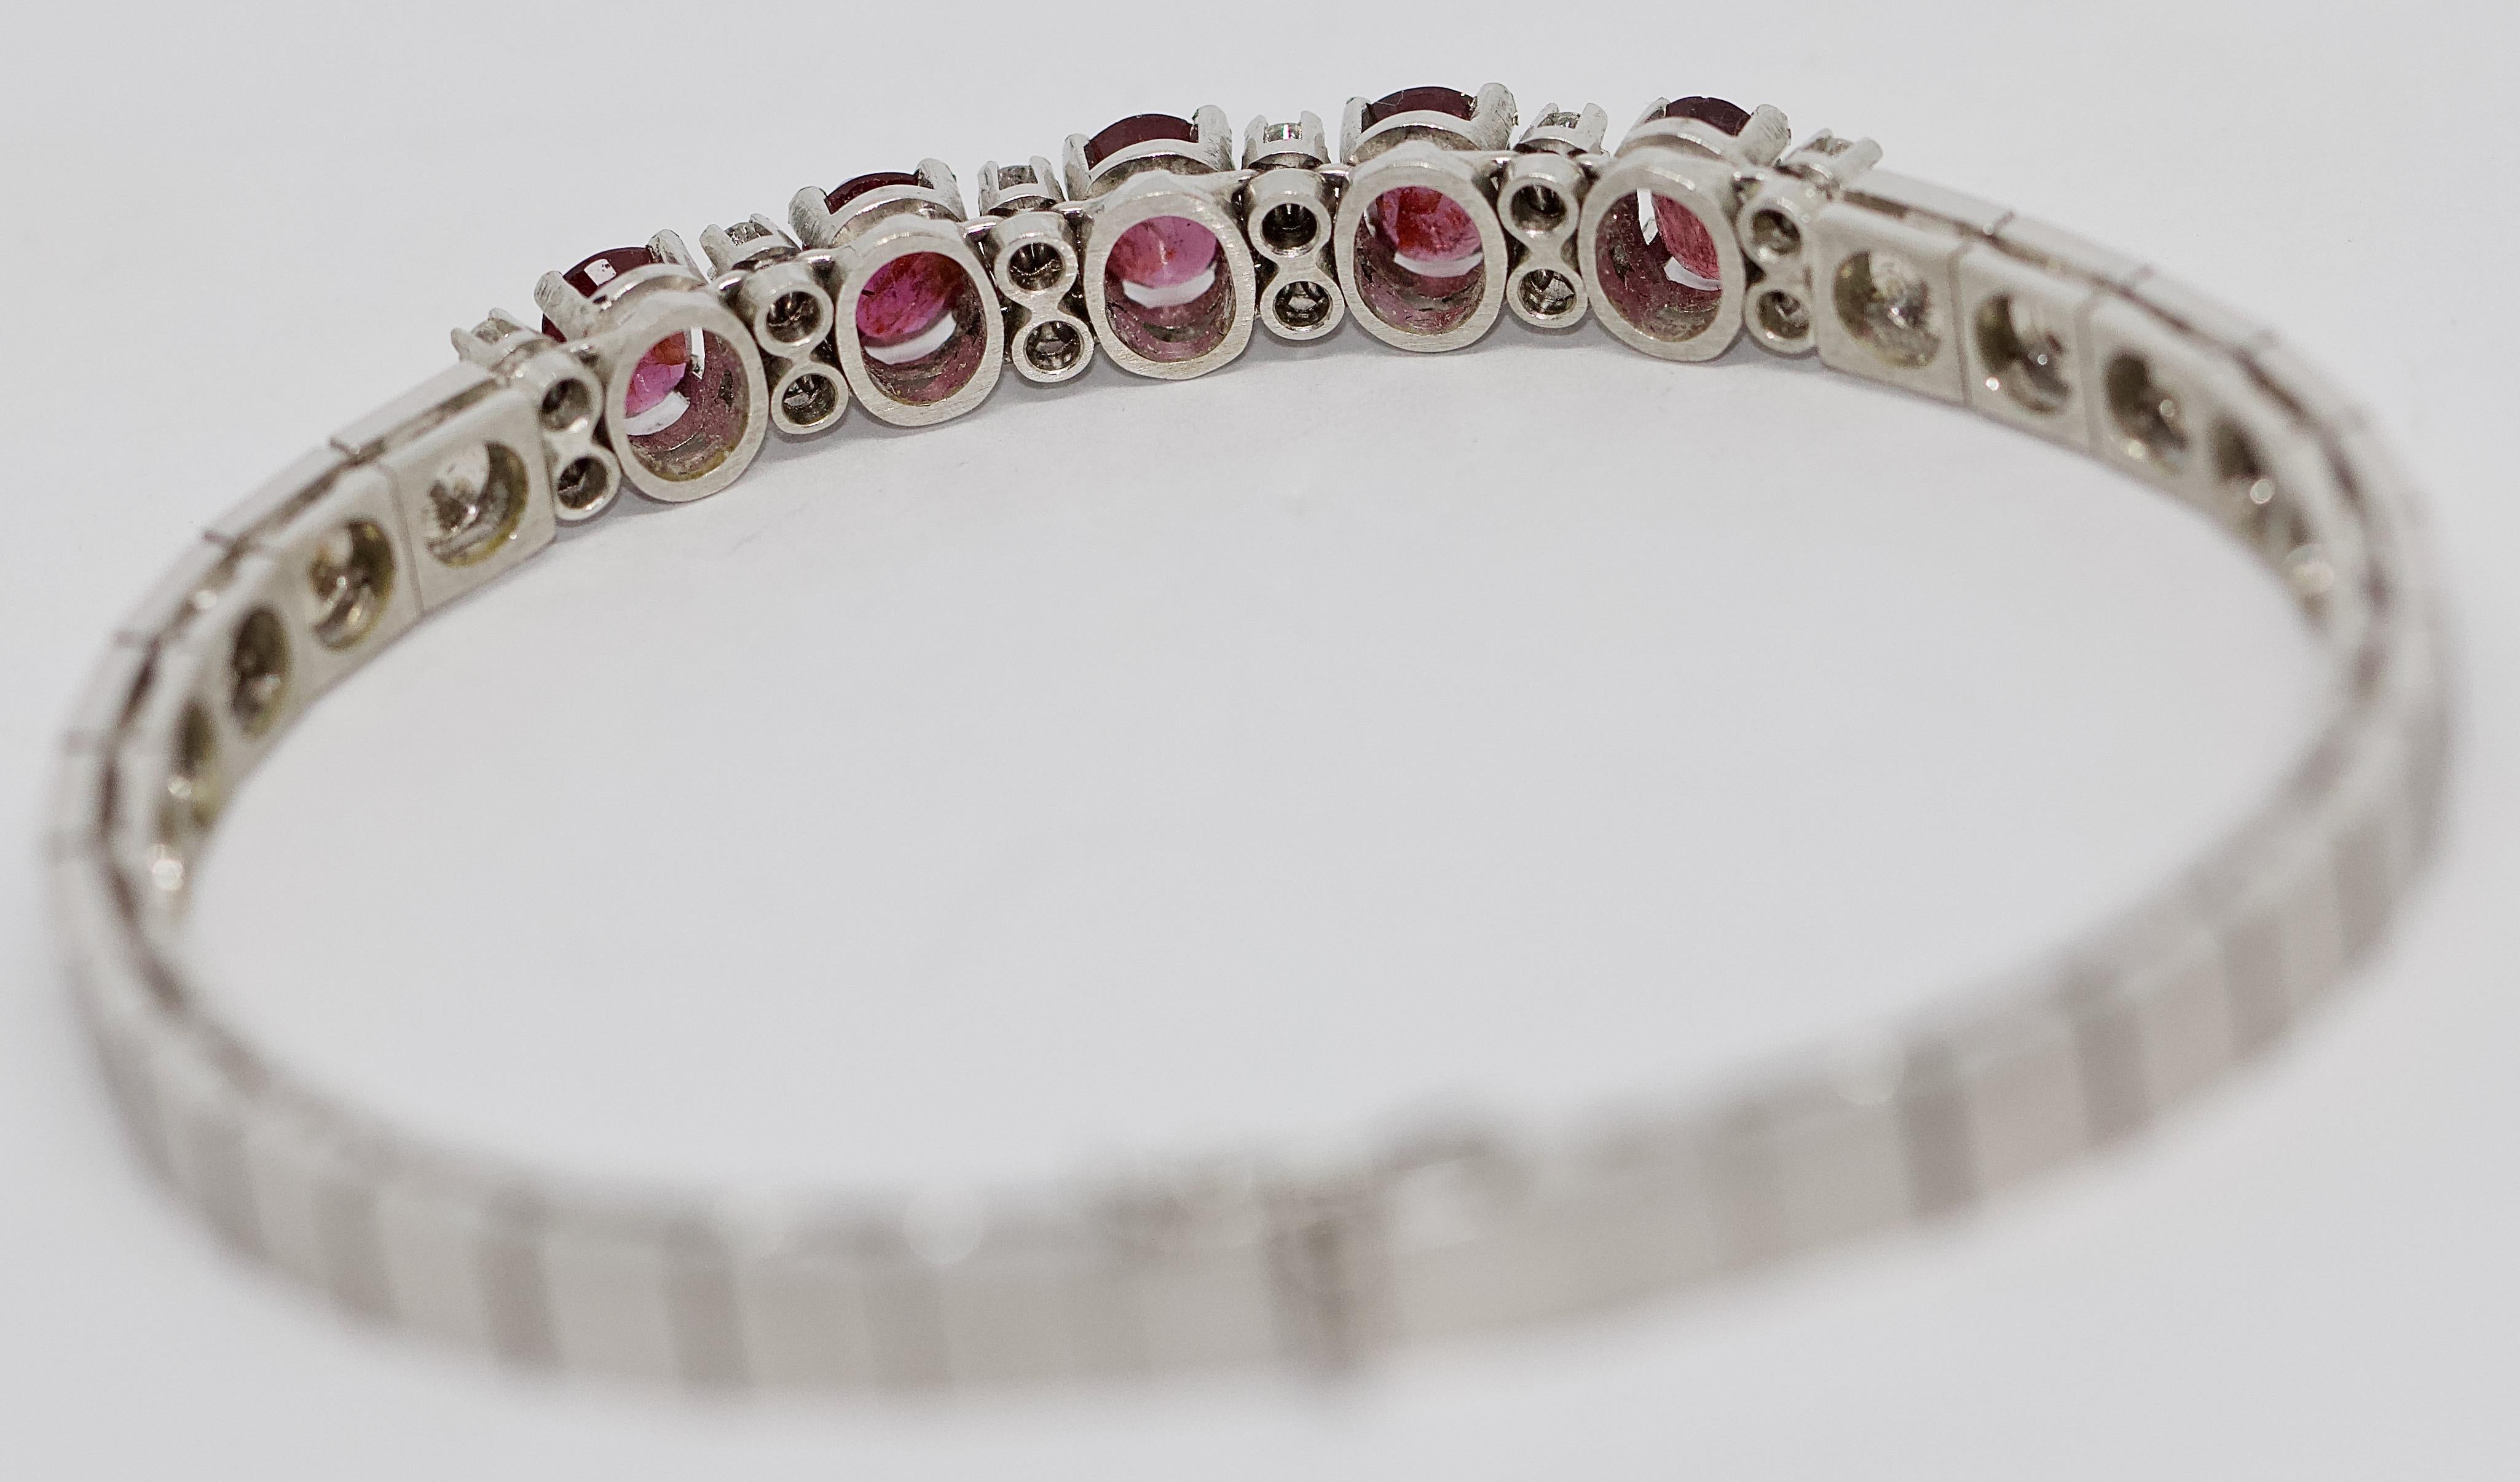 Women's Ladies White Gold Tennis Bracelet with Rubies and Diamonds For Sale